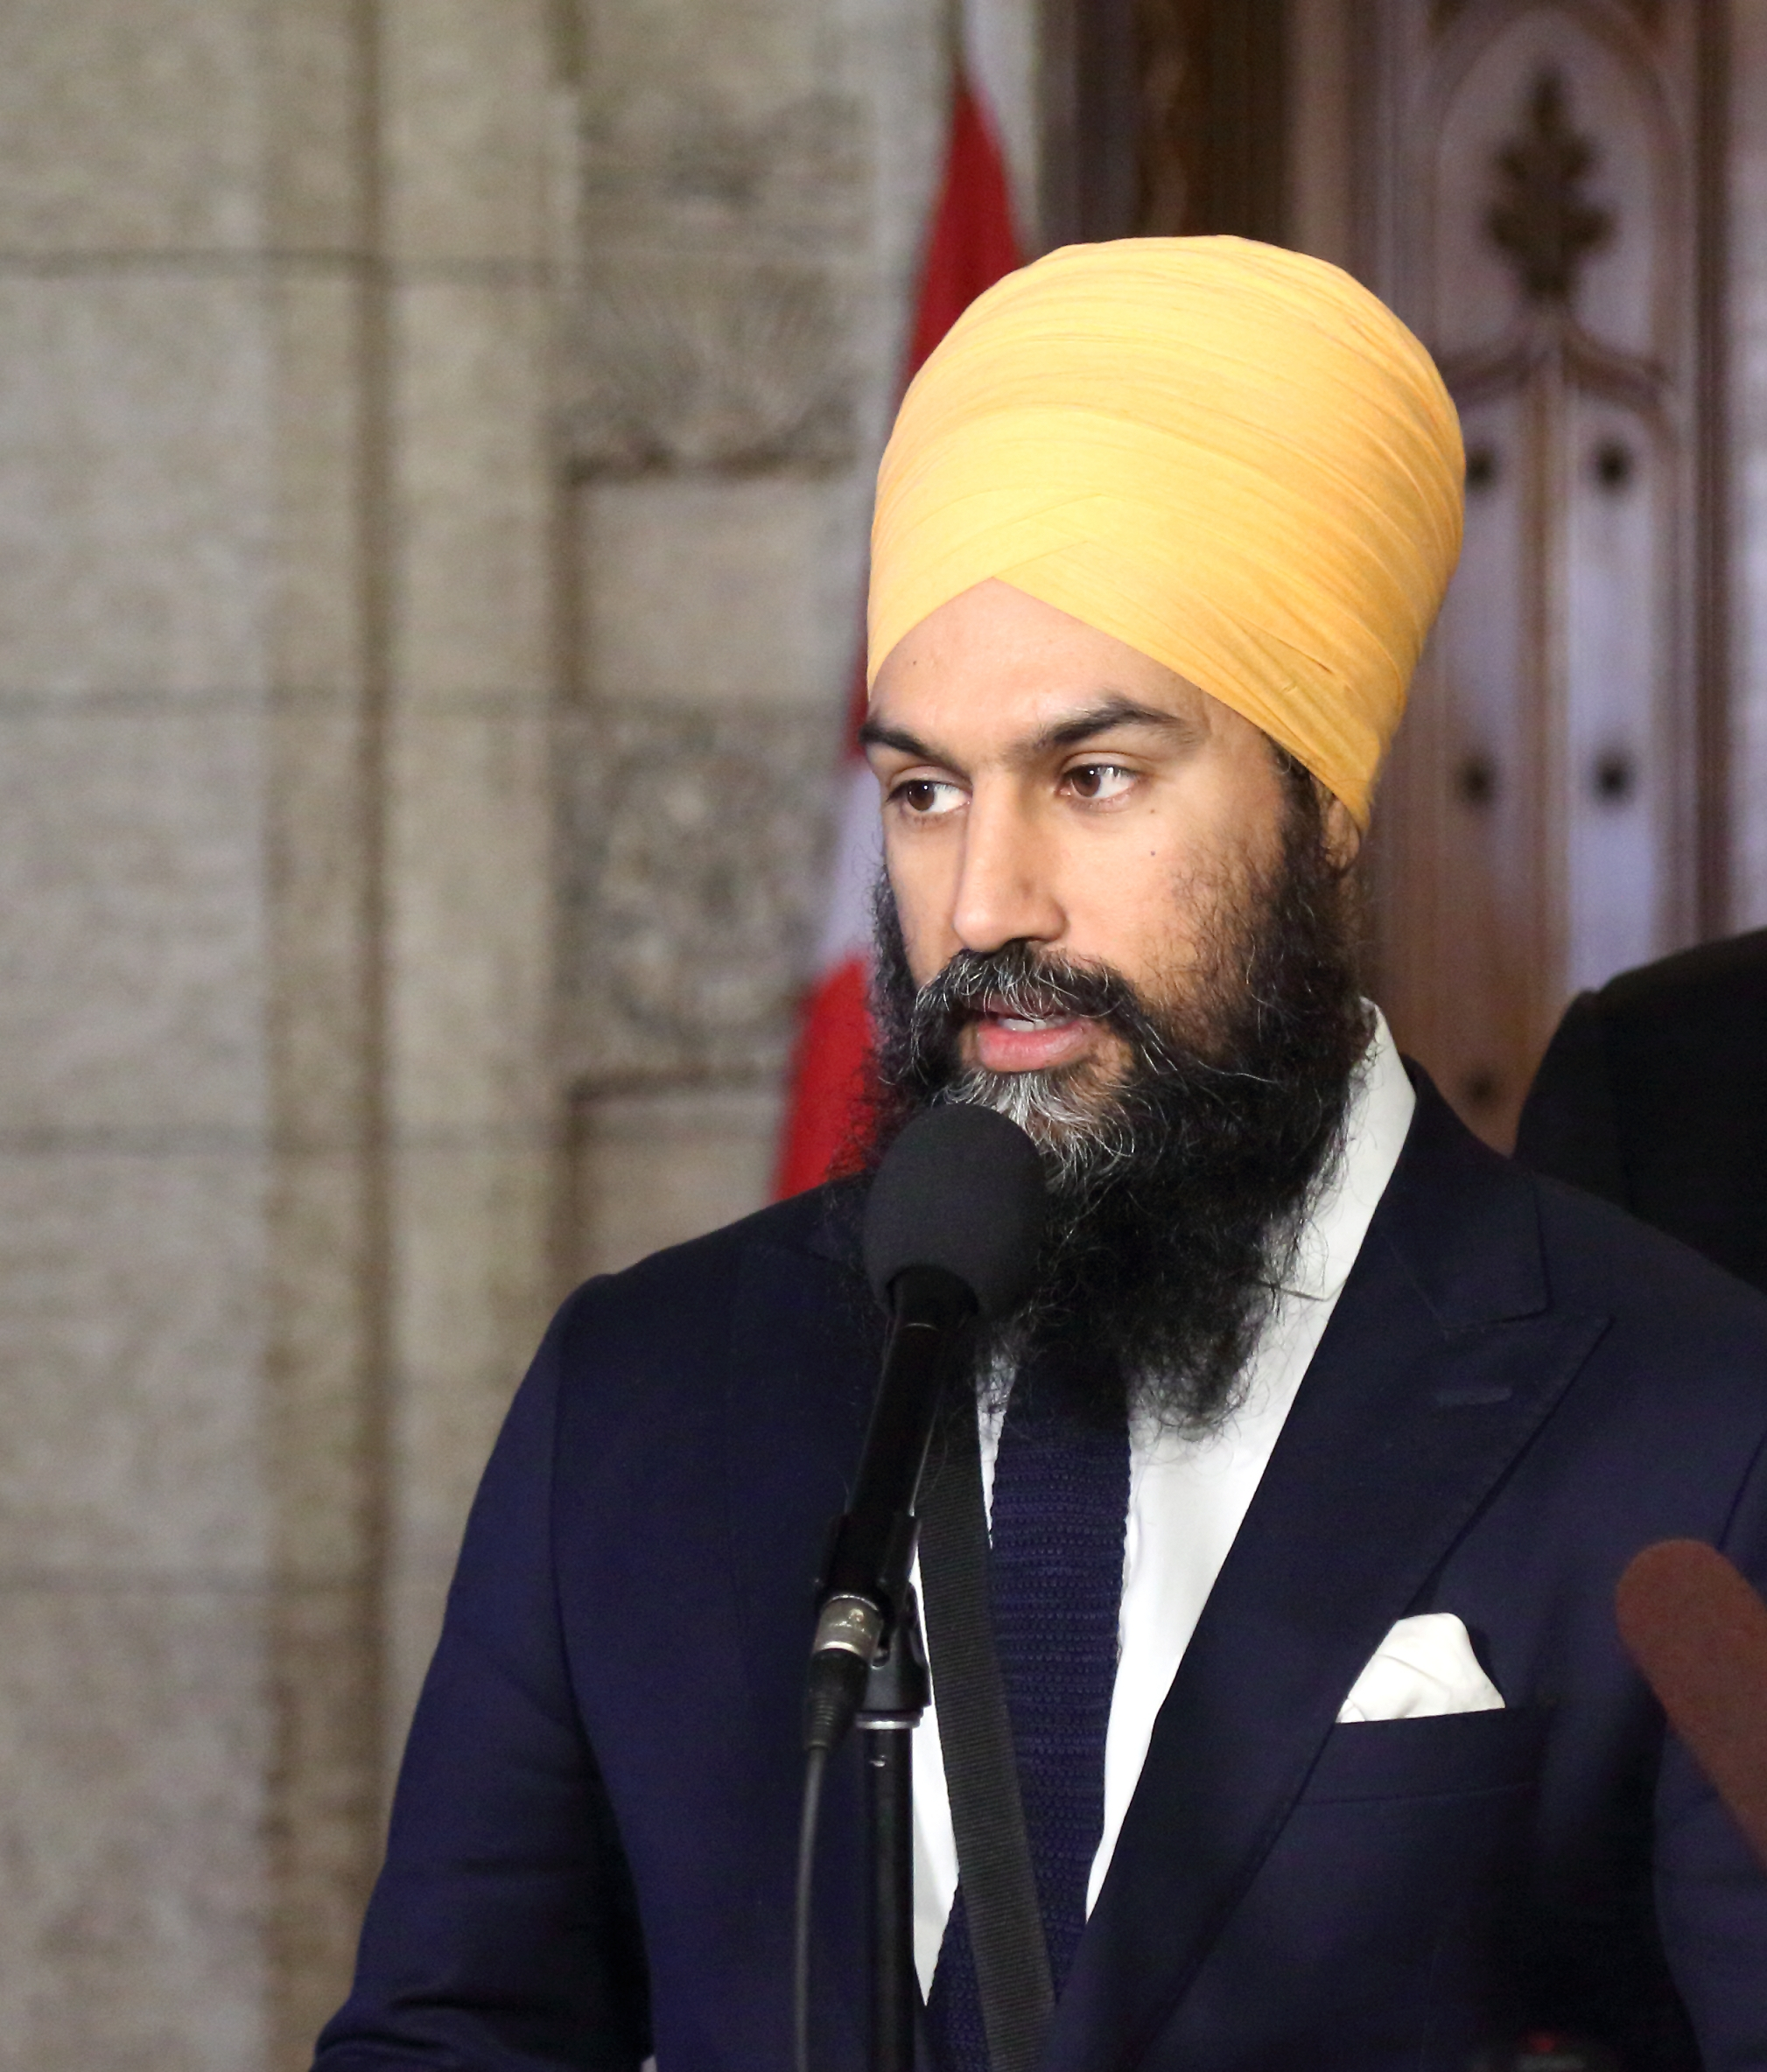 “O’Toole is no friend to Canadian workers” says NDP Leader Jagmeet Singh